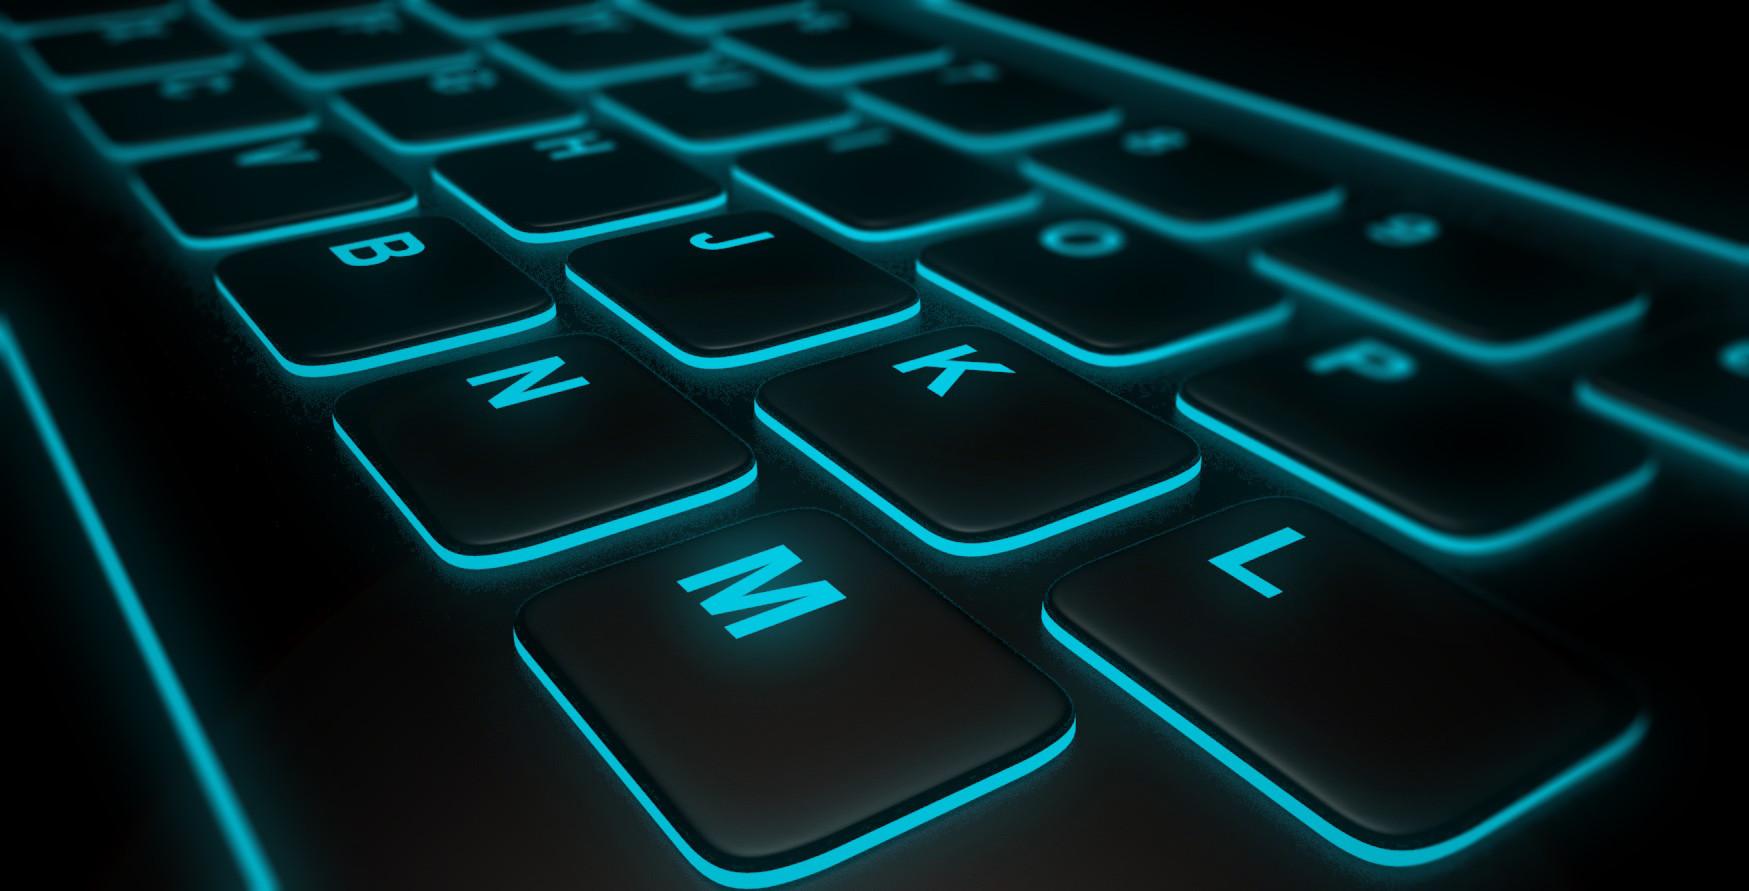 Keyboard Wallpaper Group , Download for free